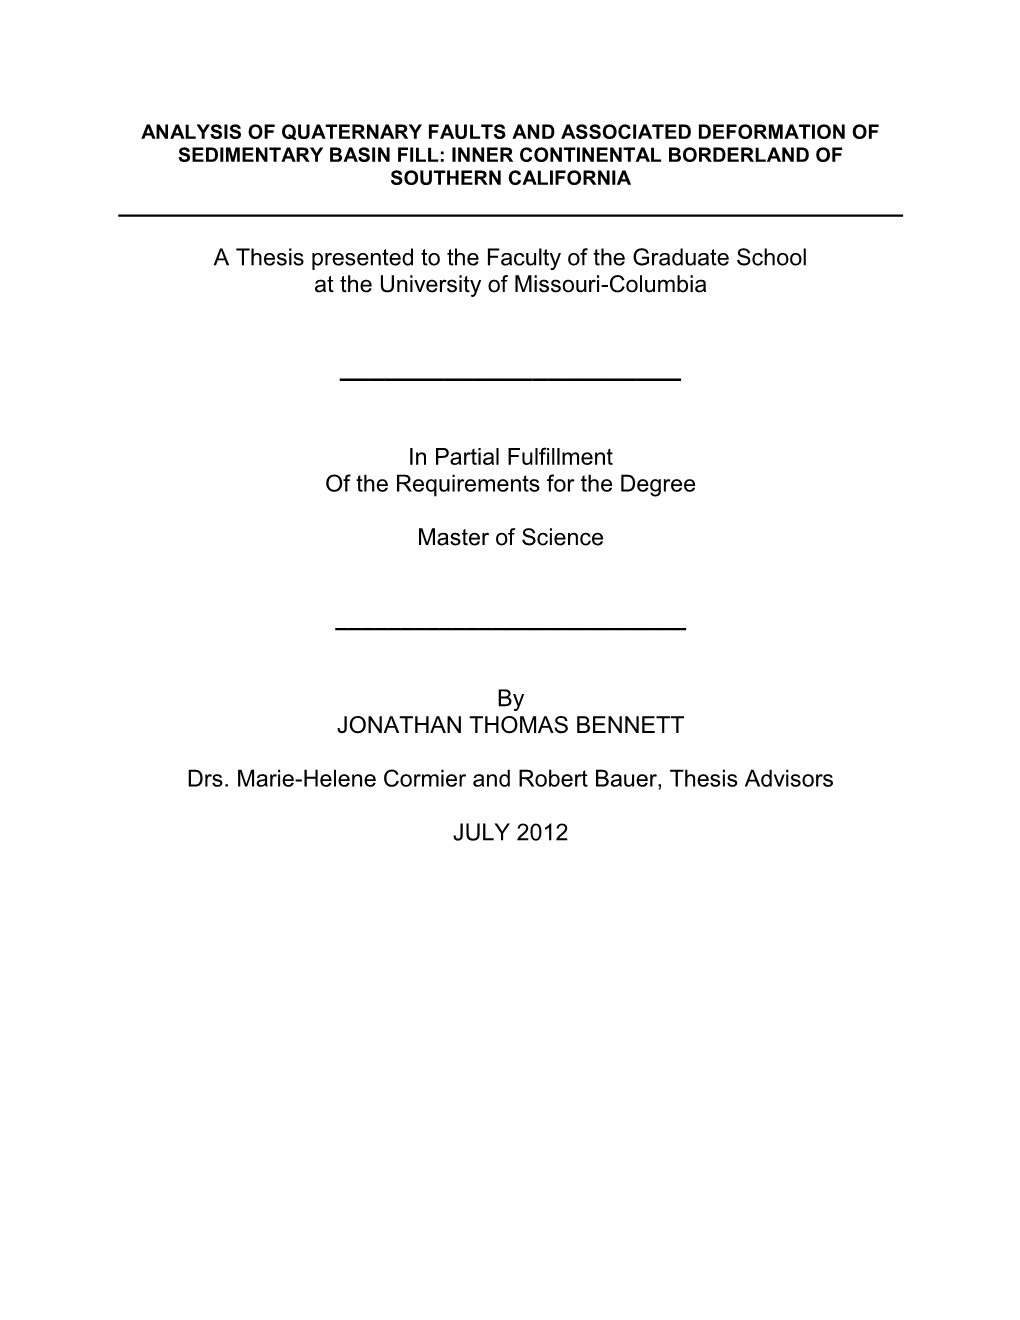 A Thesis Presented to the Faculty of the Graduate School at the University of Missouri-Columbia